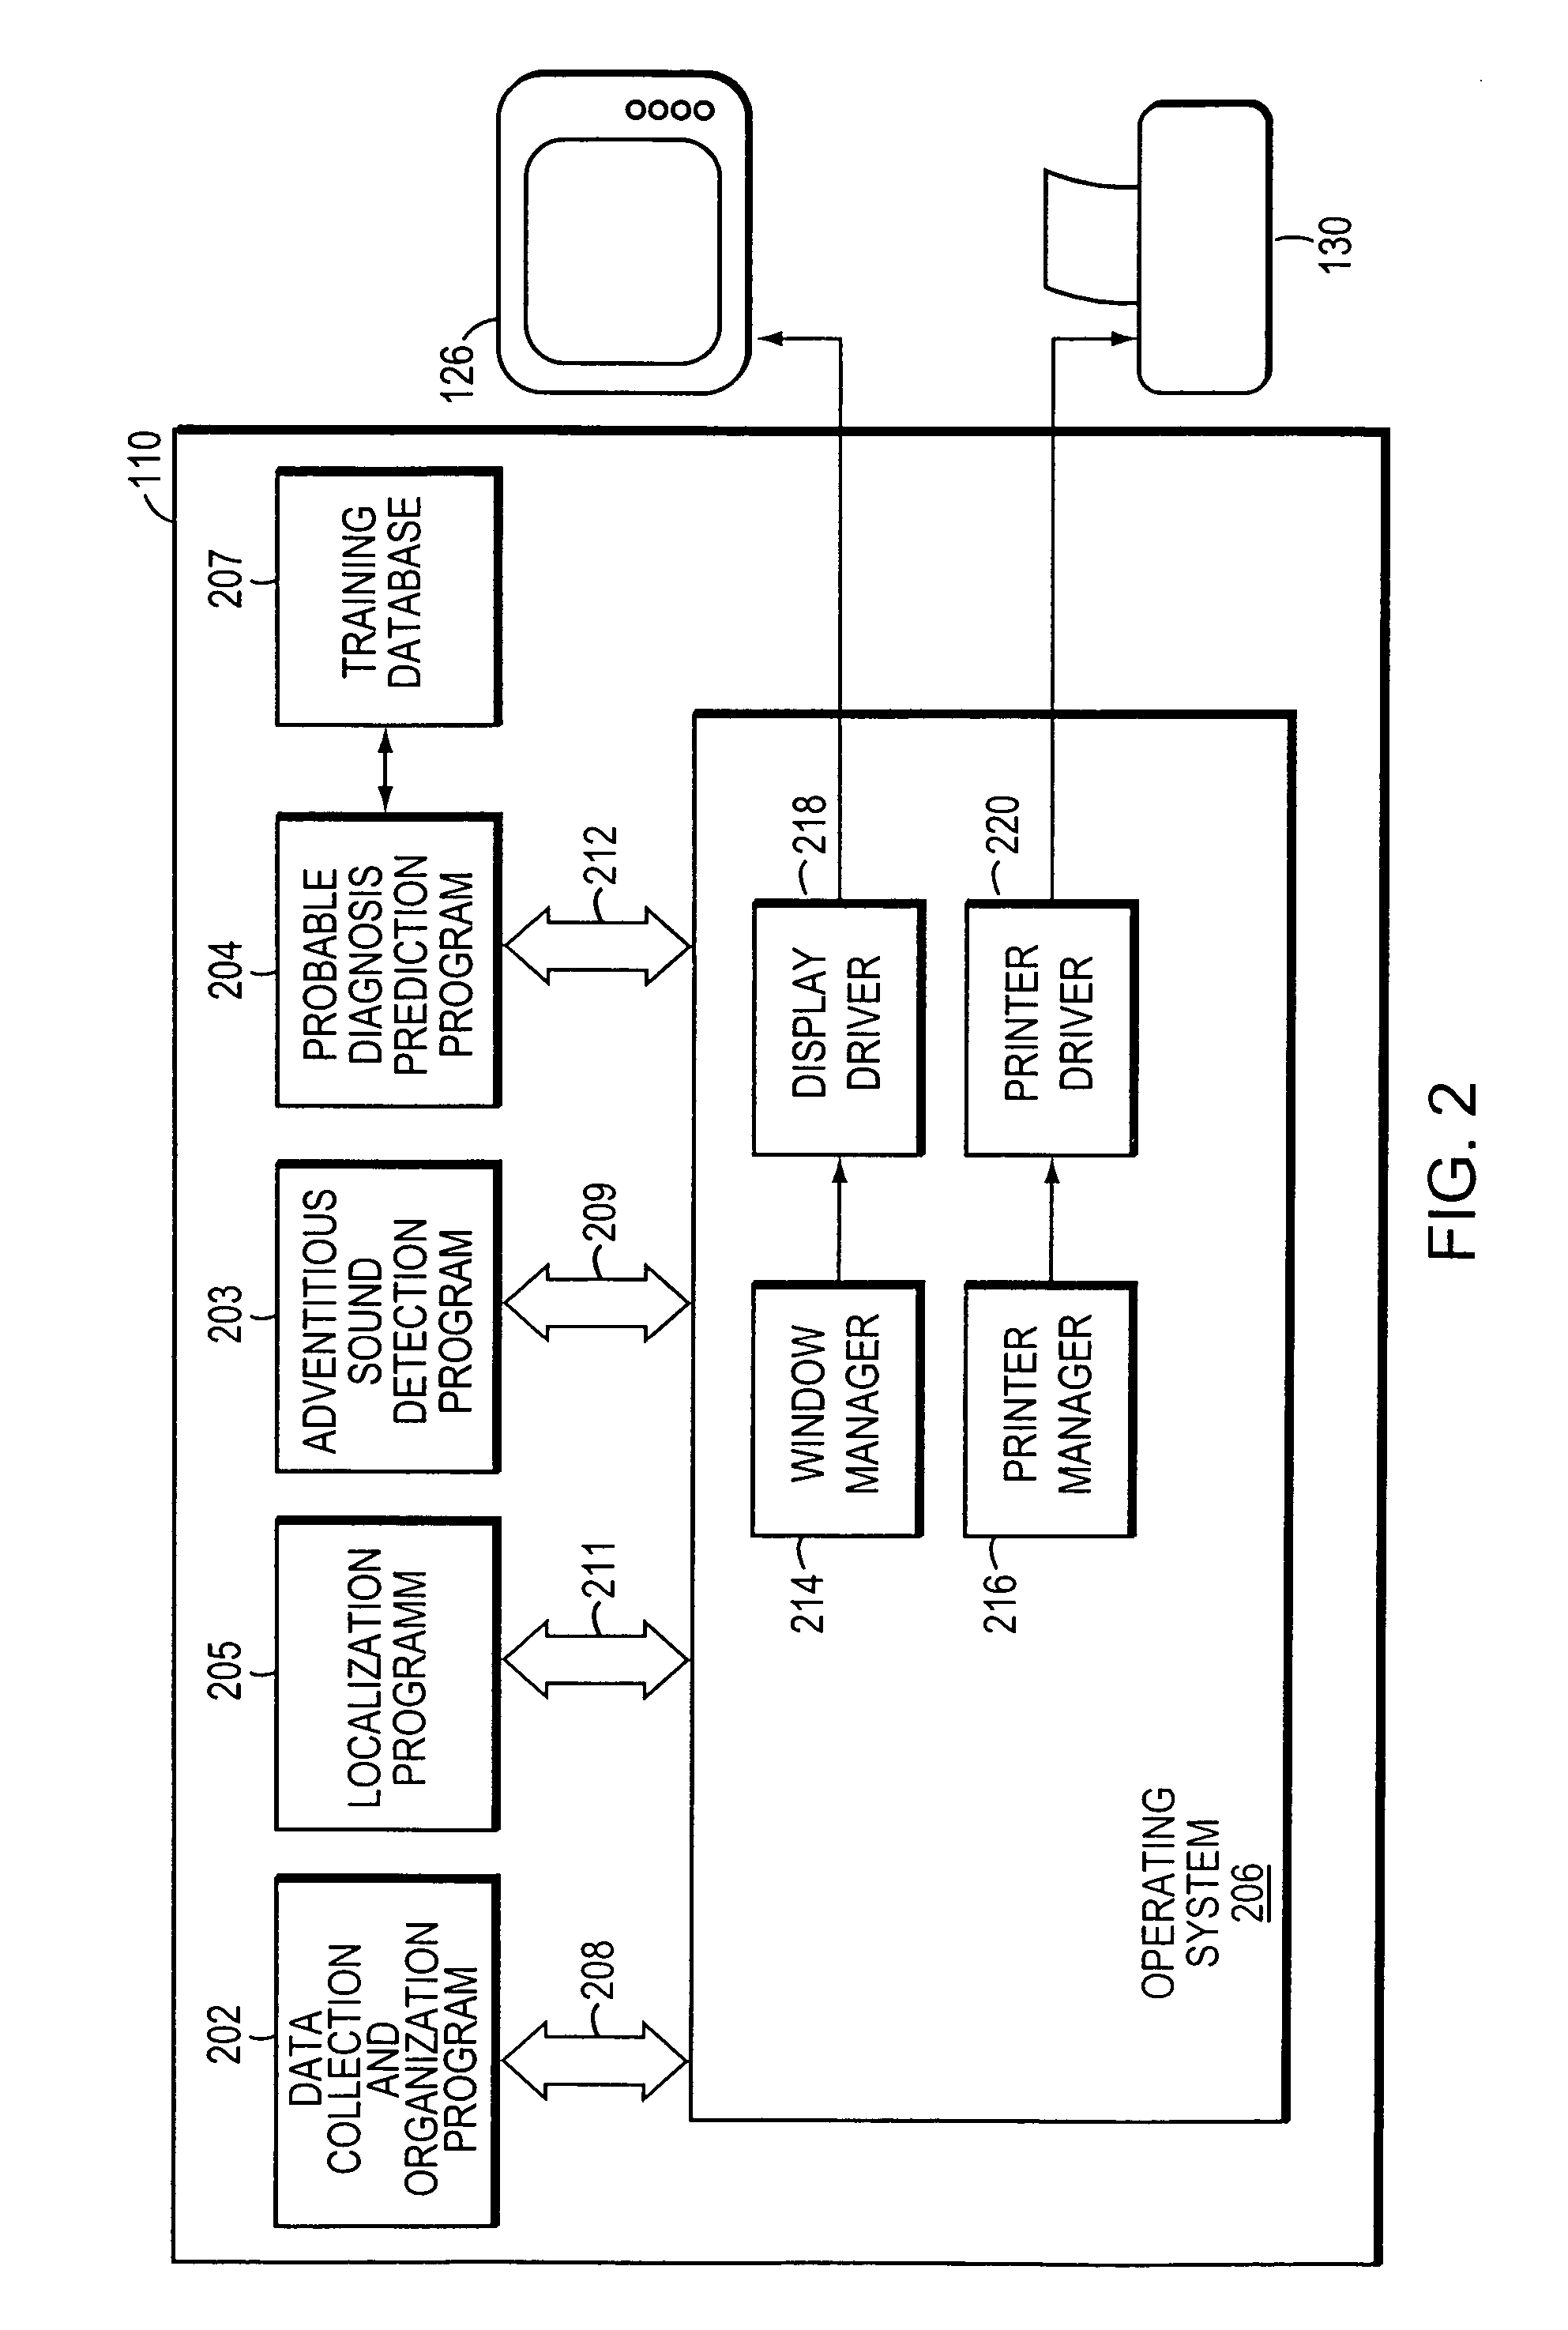 Method and apparatus for displaying body sounds and performing diagnosis based on body sound analysis